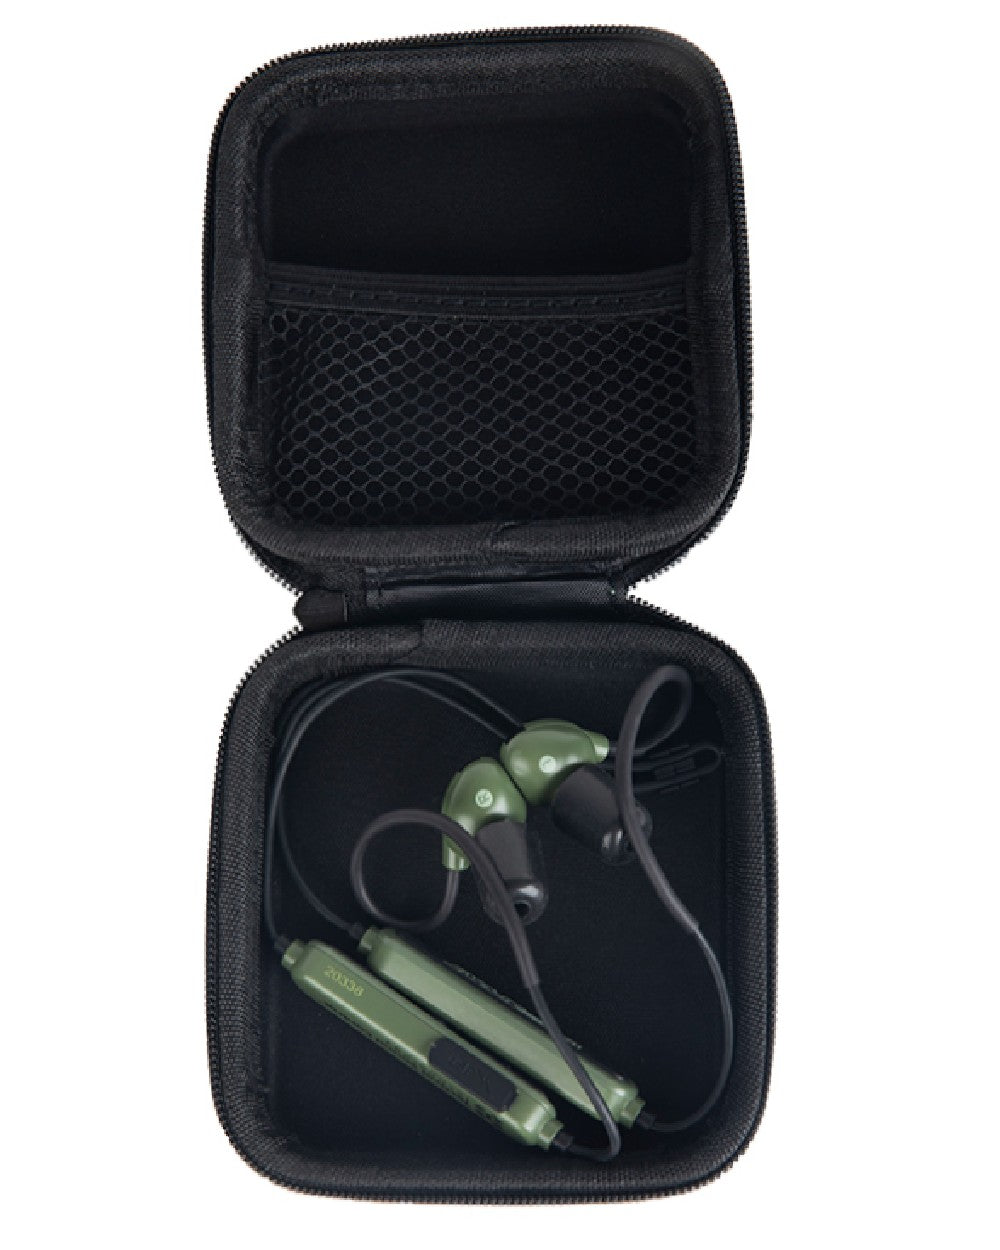 ISOTune Sport Advance Tactical Hearing Protection